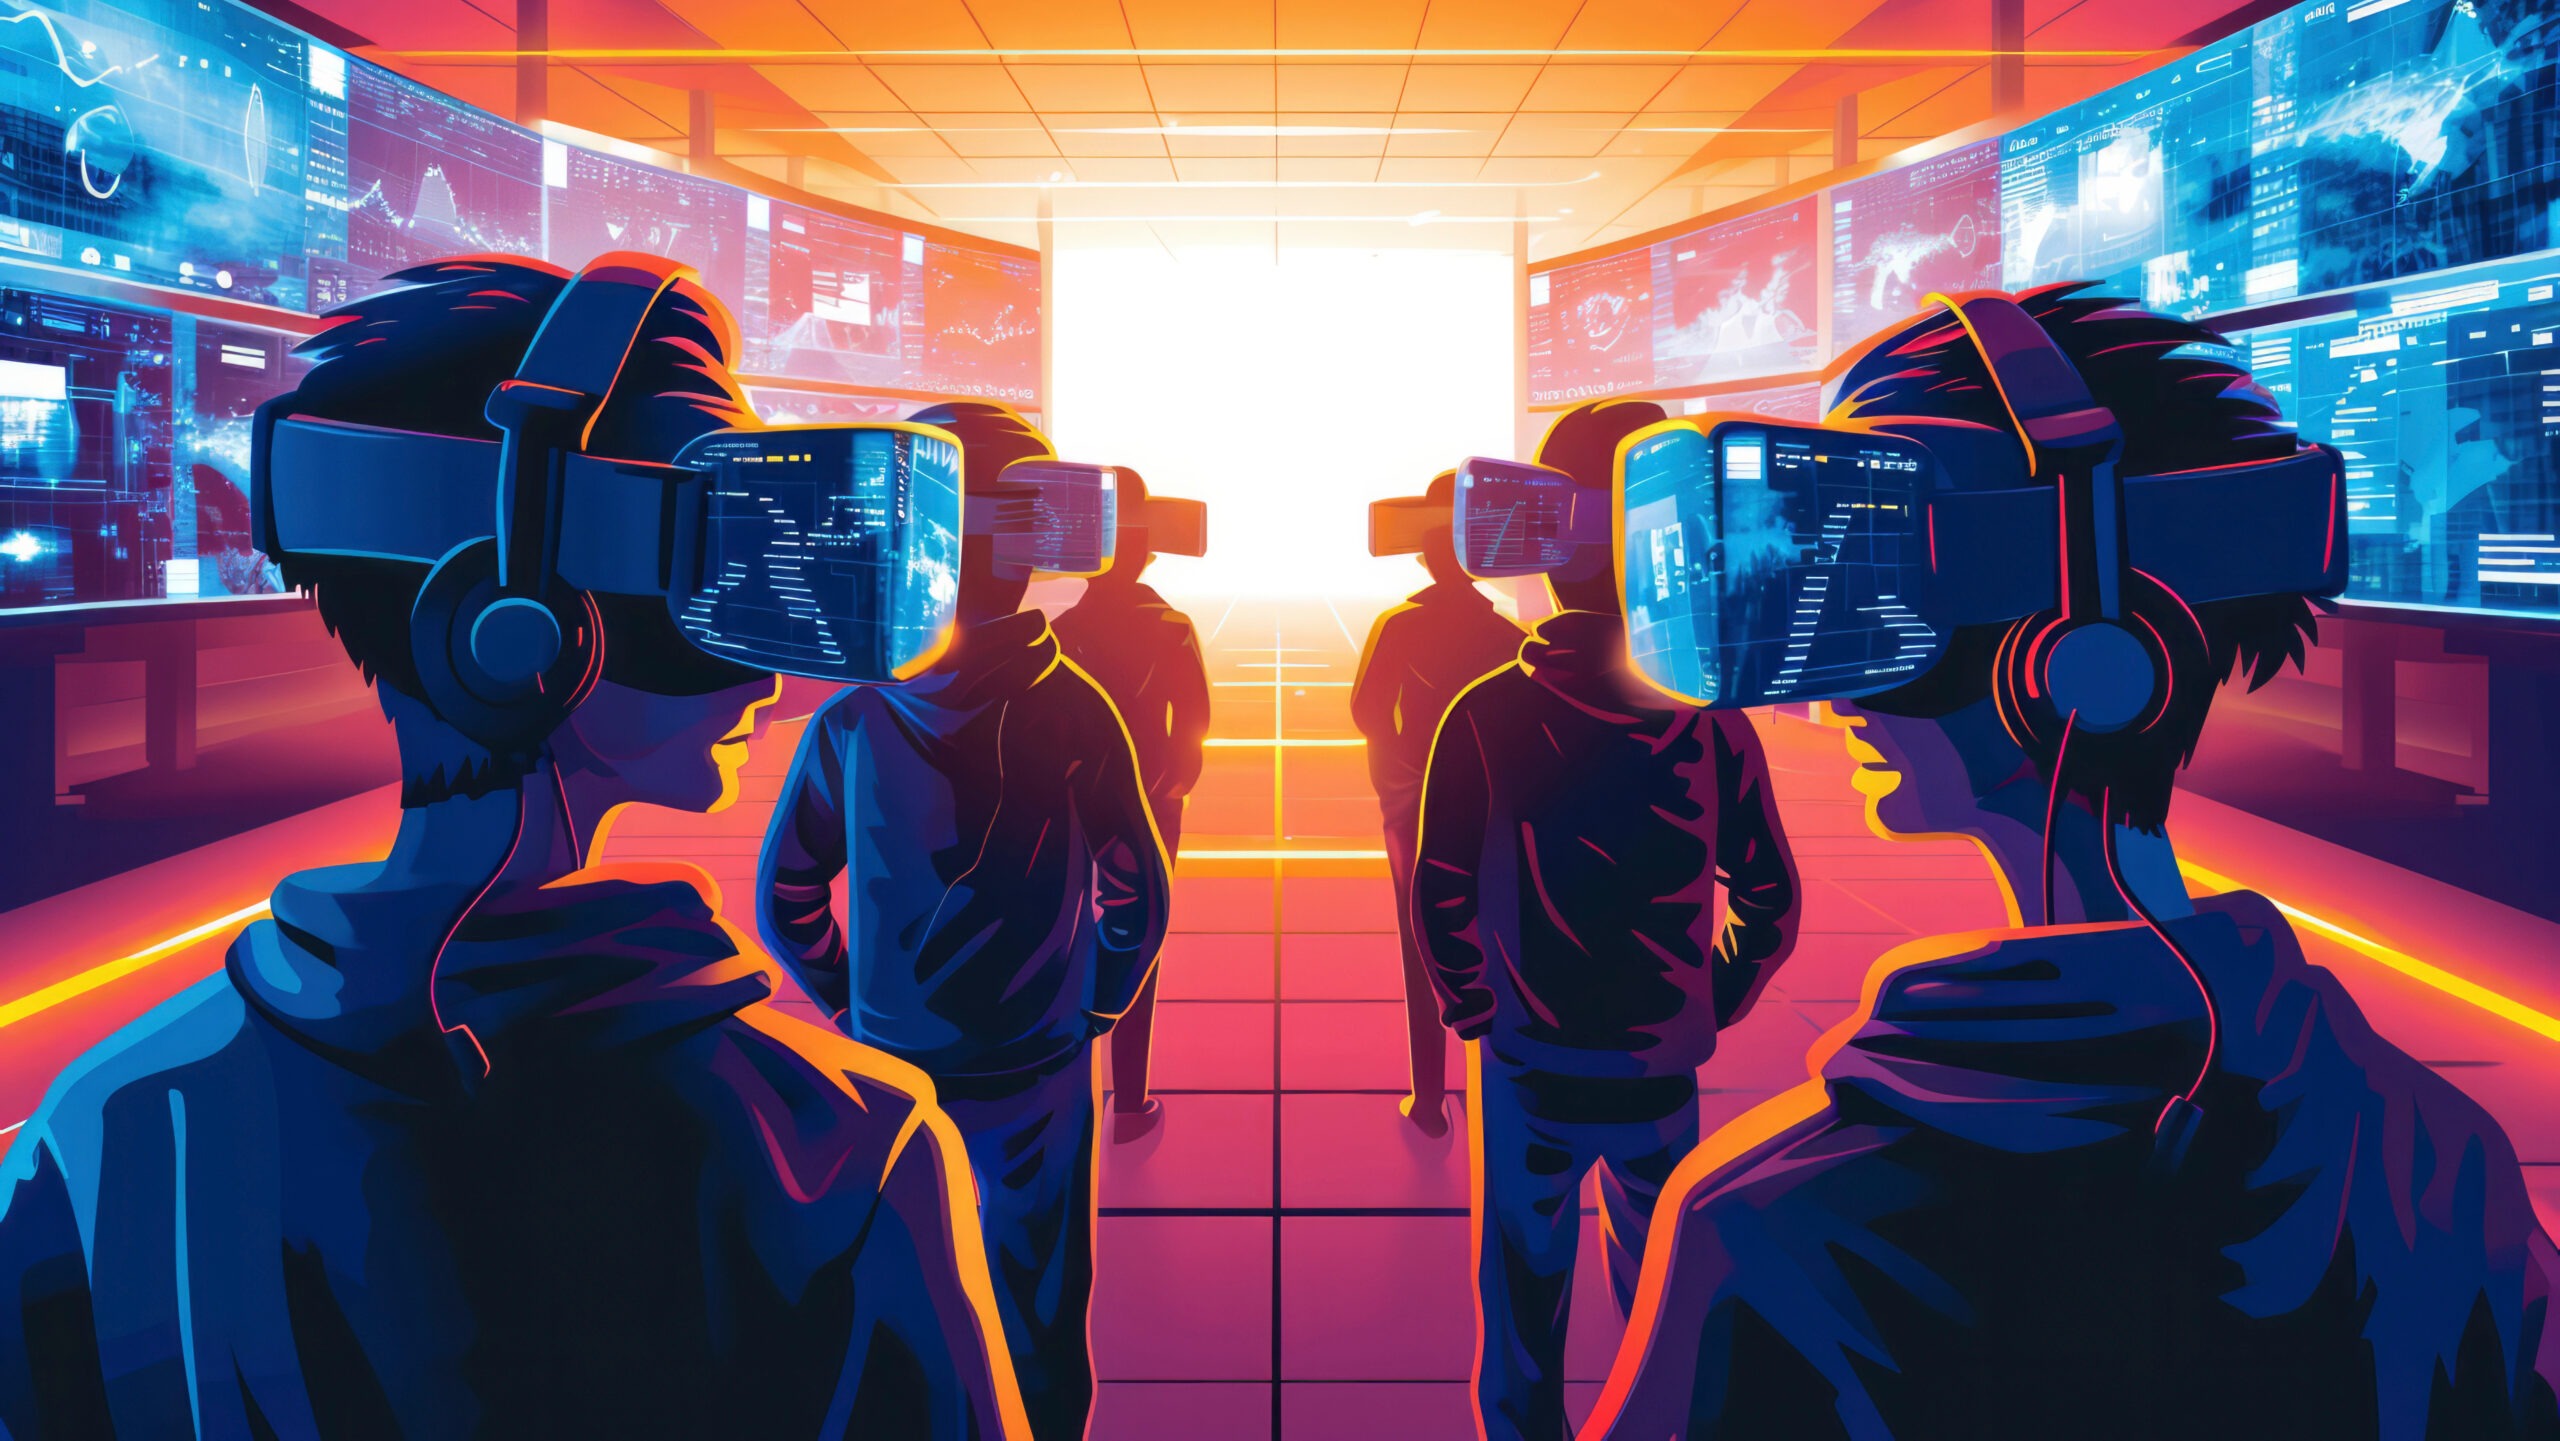 VR creates immersive digital environments, often used in gaming,